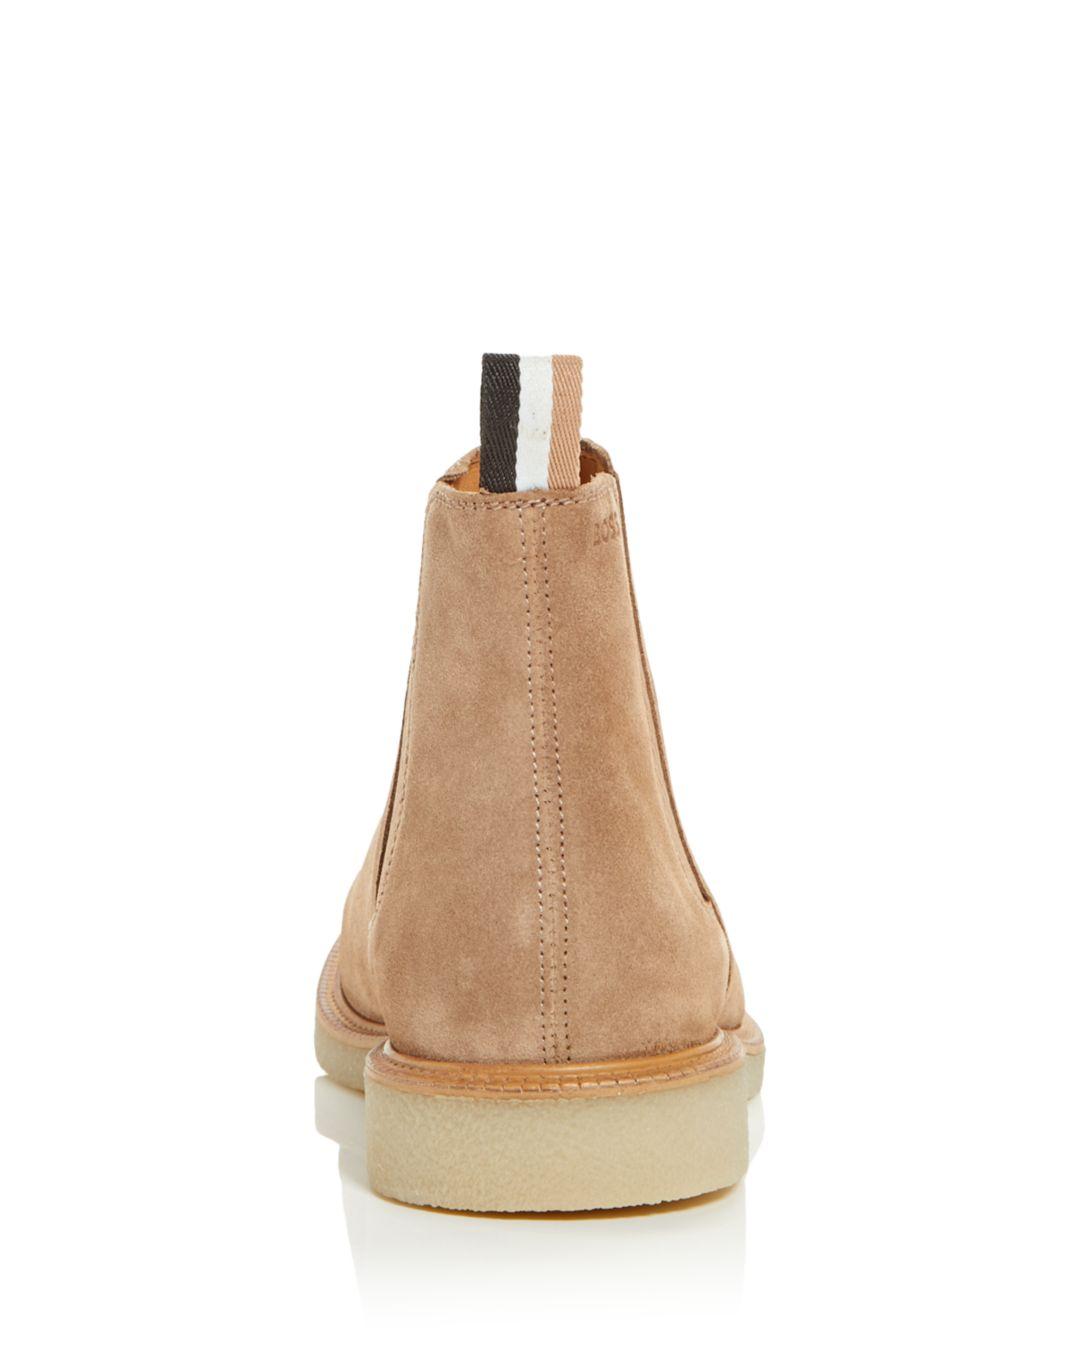 BOSS by HUGO BOSS Tunley Pull On Chelsea Boots in Natural for Men | Lyst